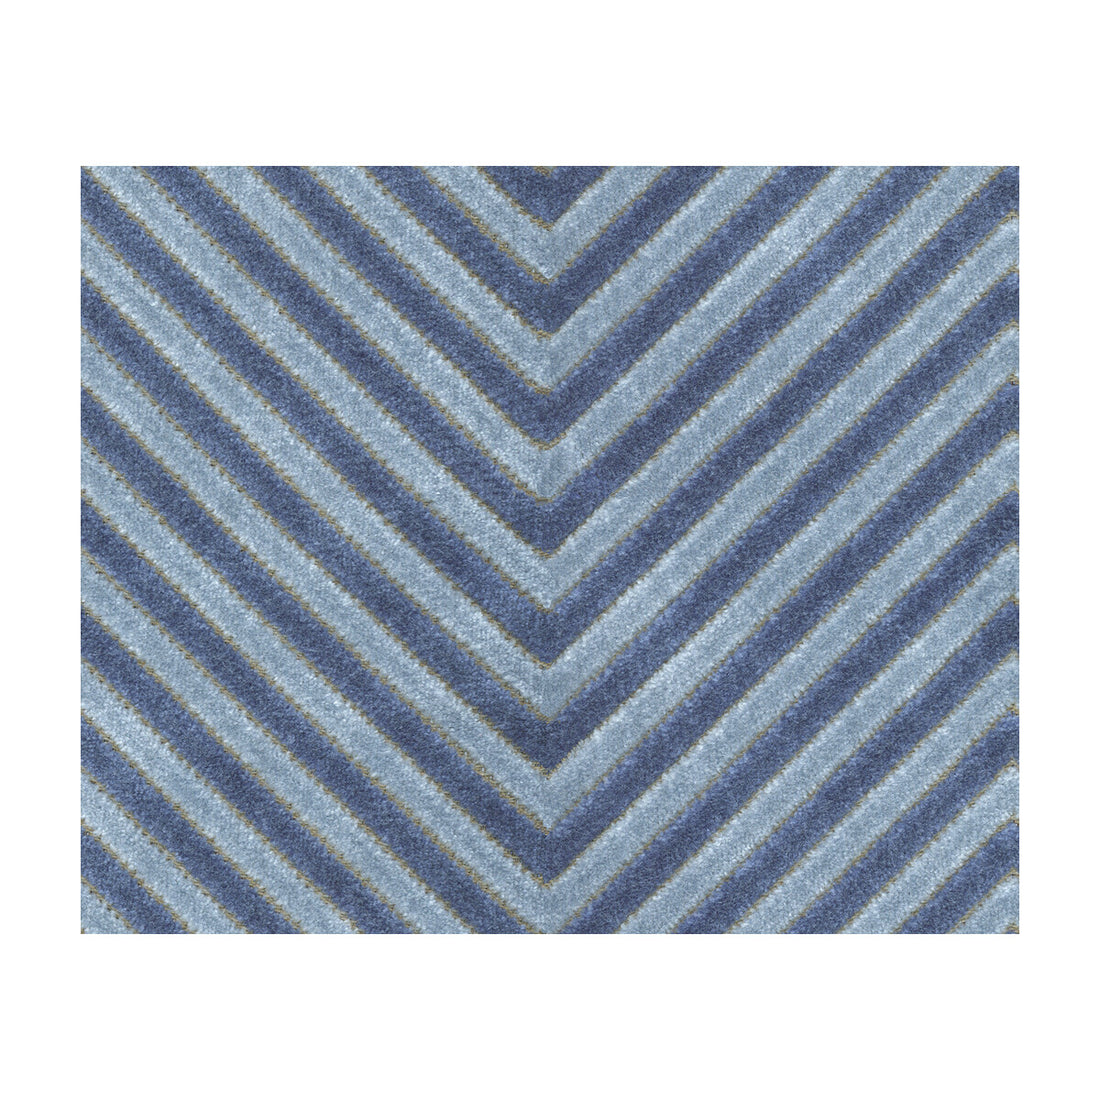 Zigandzag fabric in indigo color - pattern 34272.515.0 - by Kravet Basics in the Sarah Richardson Harmony collection